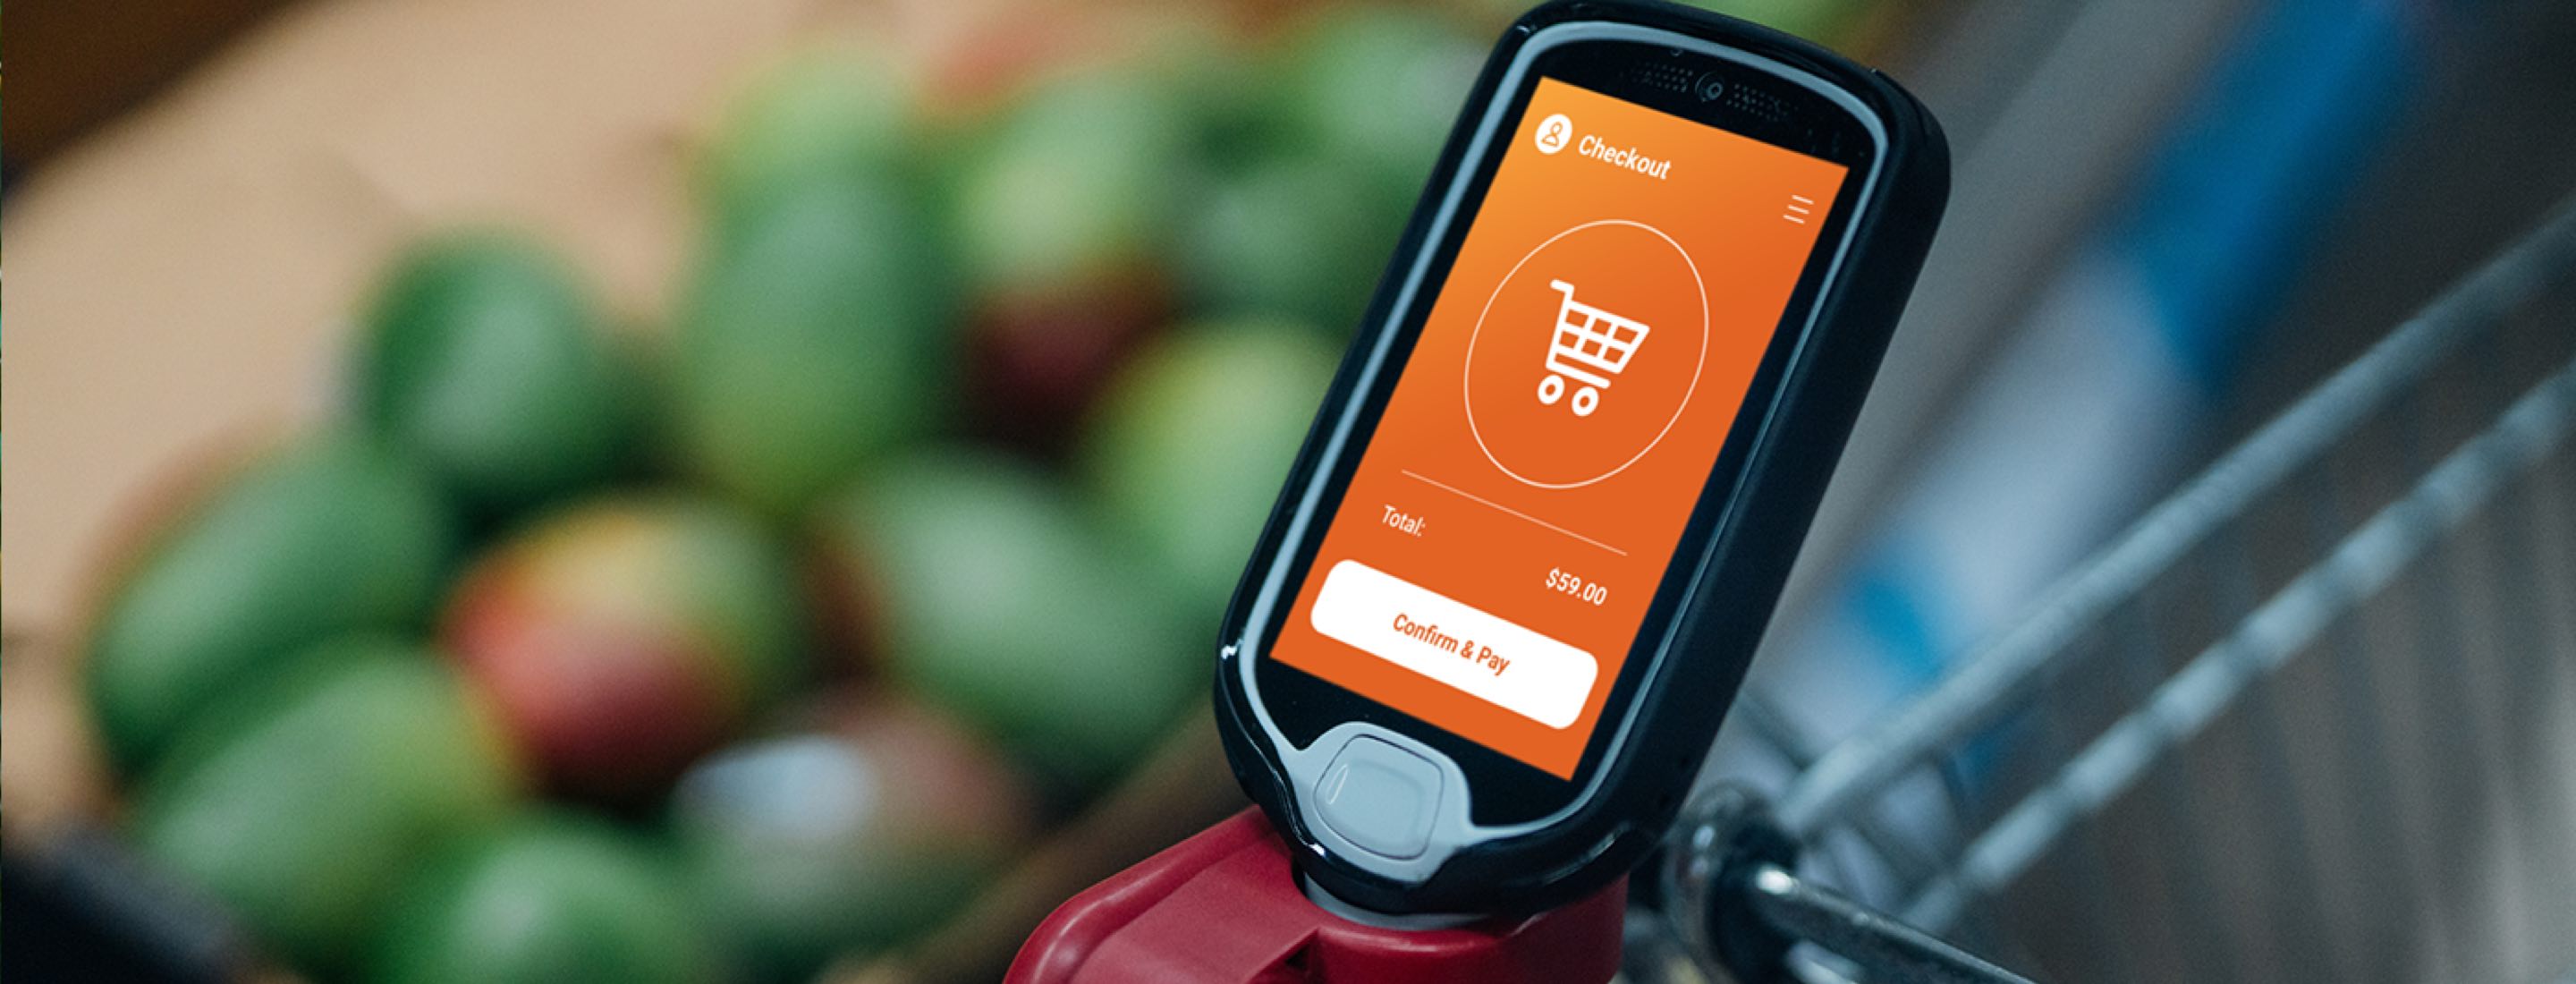 Digital price scanner built into shopping cart for customer self-service